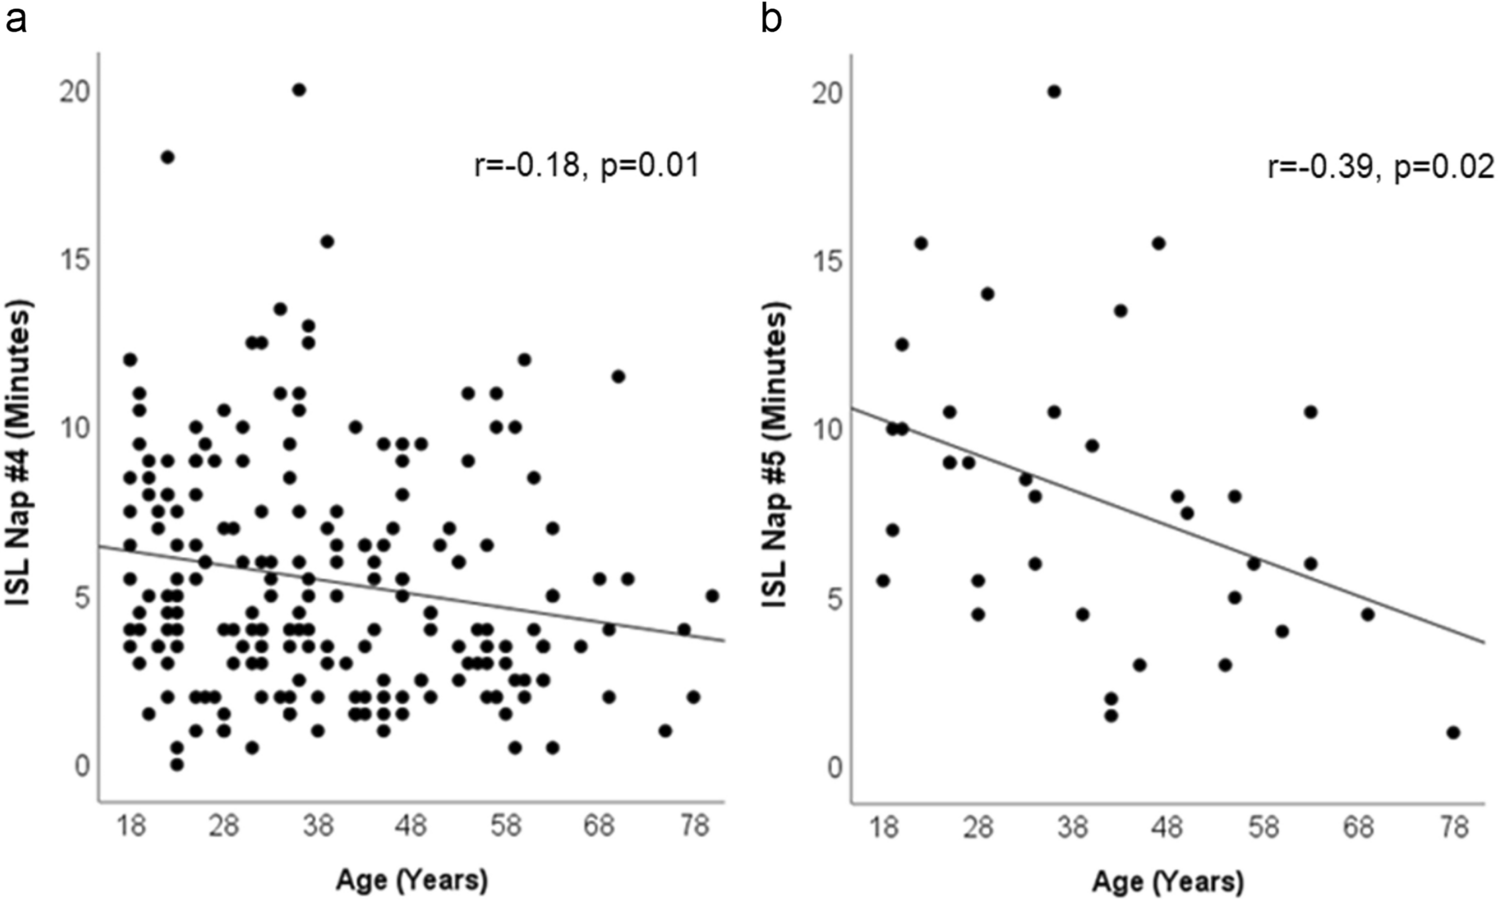 Aging and sex are associated with multiple sleep latency test findings and their relationship with self-reported sleepiness